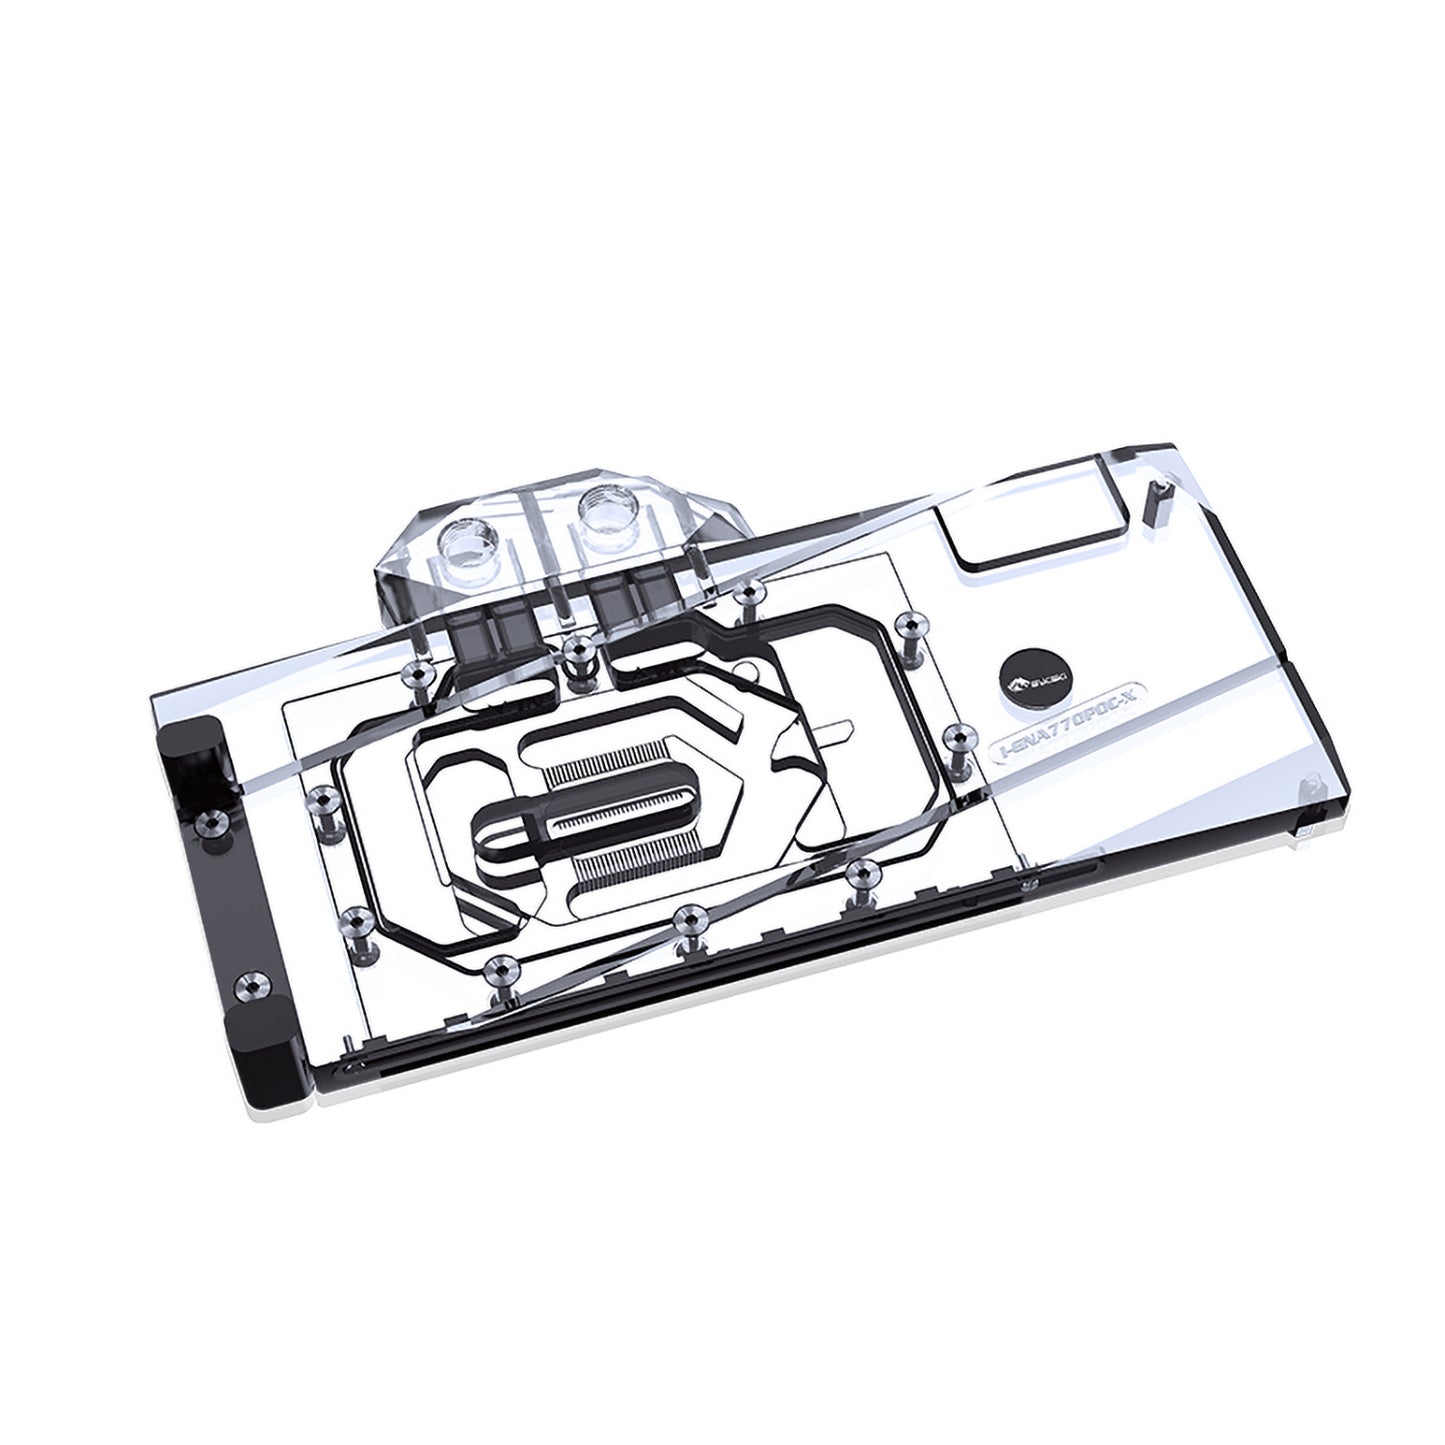 Bykski GPU Water Block For Gunnir Inter Arc A770 Photon 16G OC, Full Cover With Backplate PC Water Cooling Cooler, I-GNA770POC-X